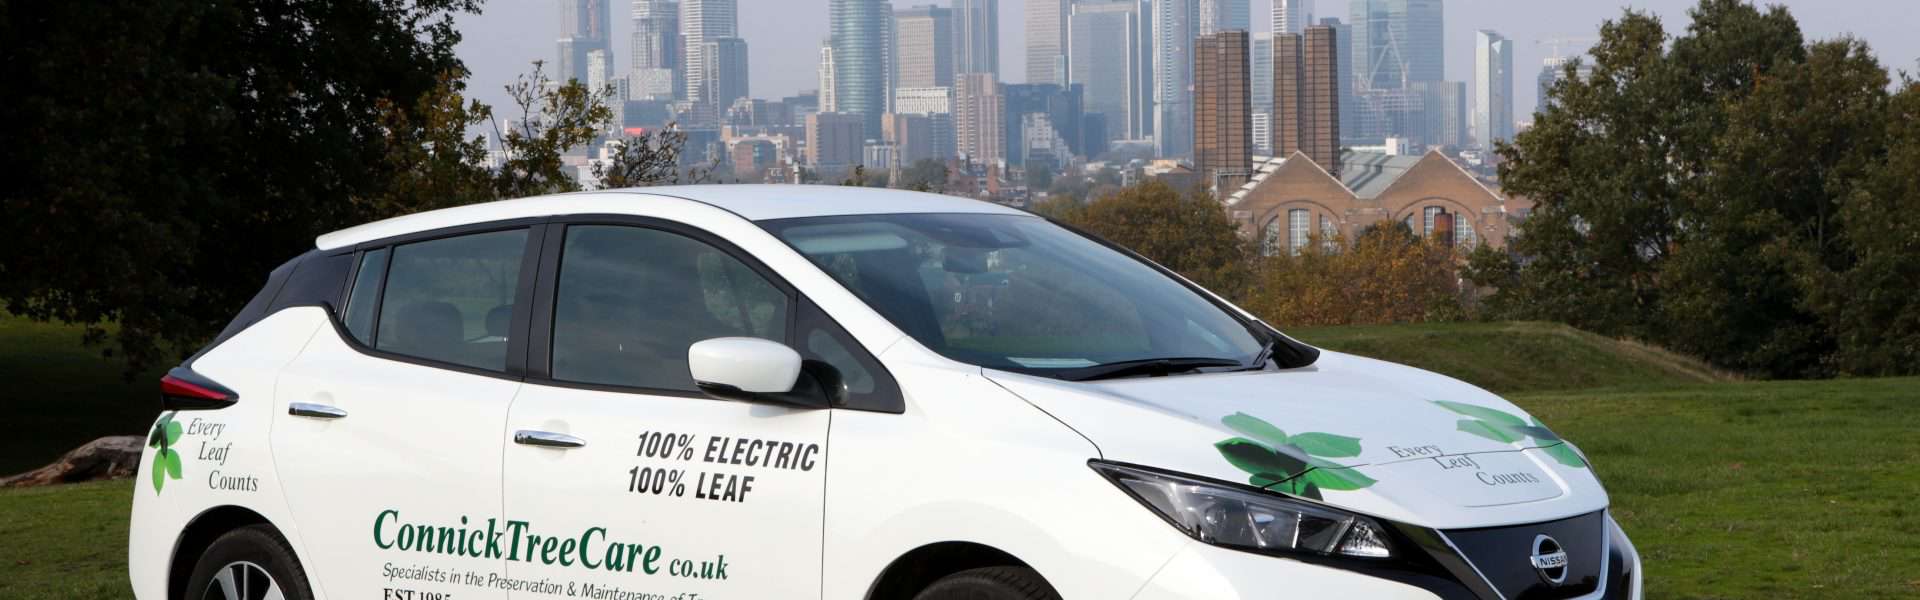 Connick Tree Care branded electric car